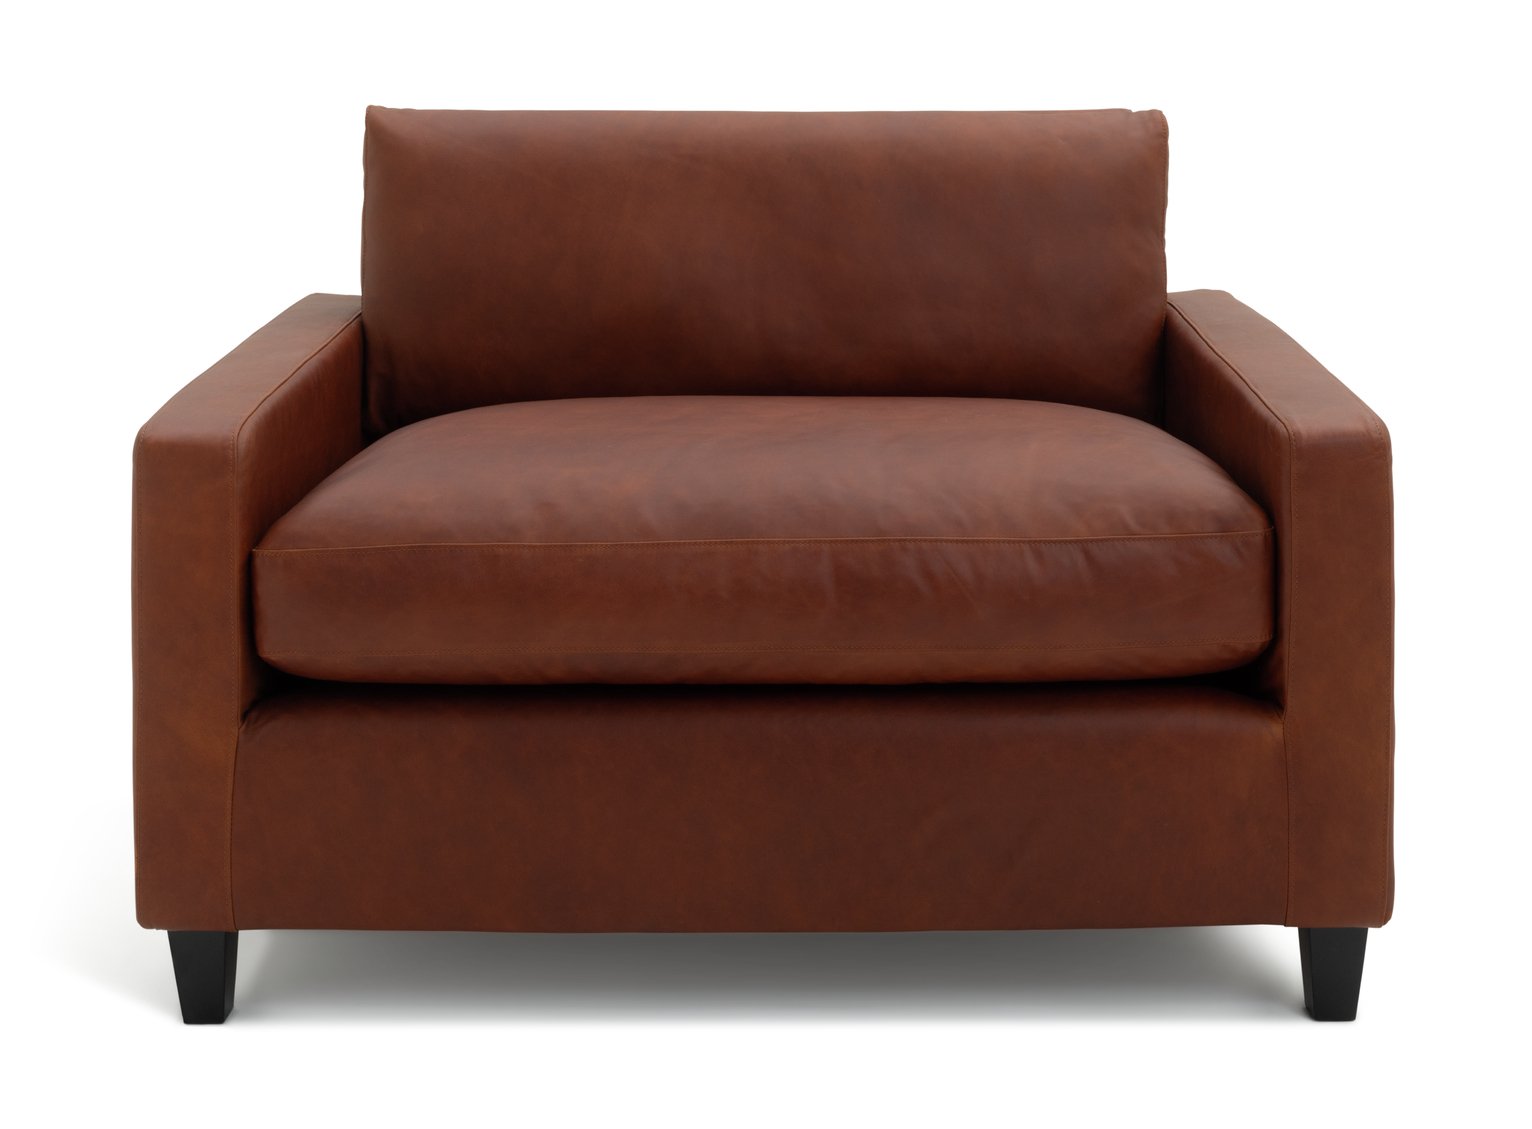 Habitat Chester Leather Cuddle Chair - Tan